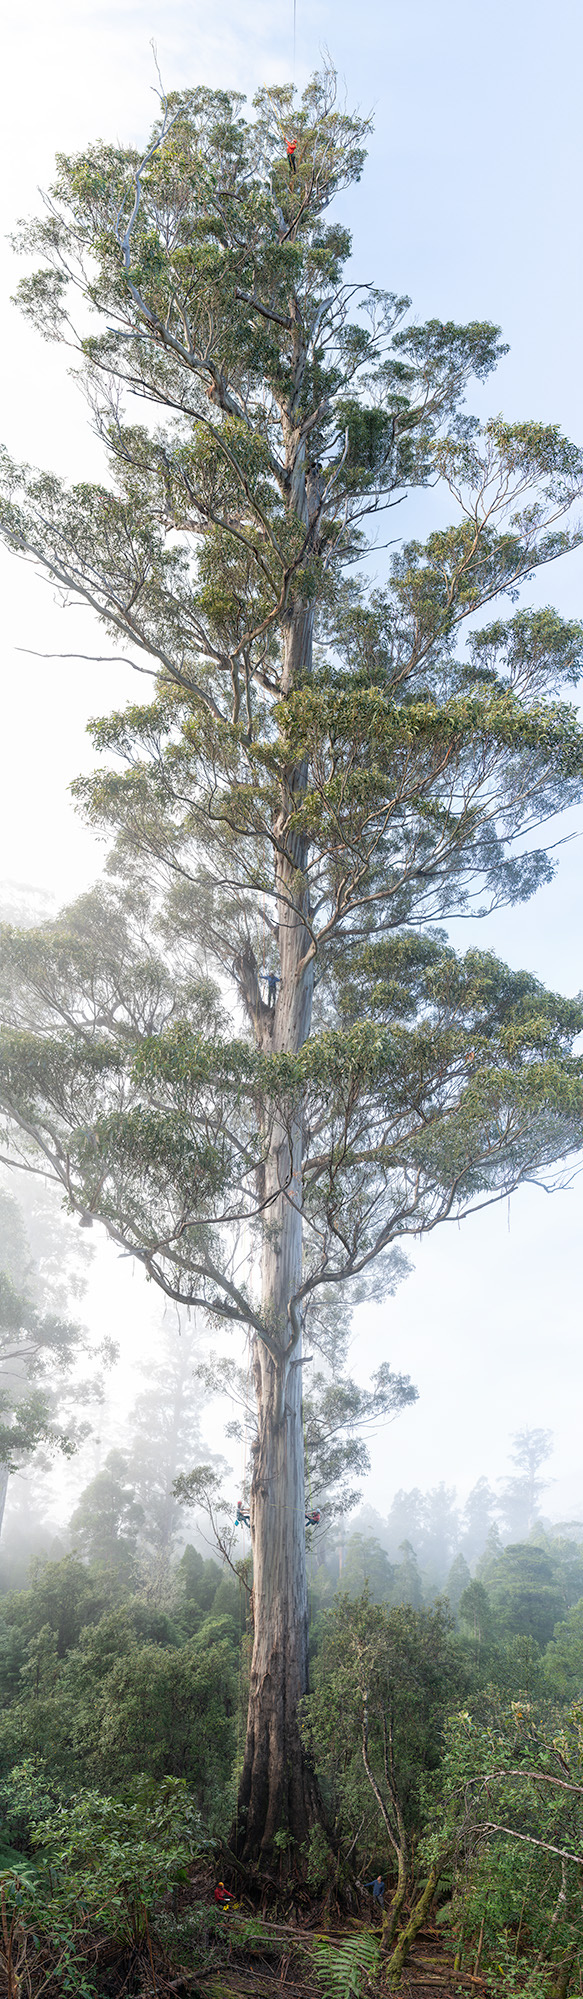 An absolutely enormous eucalpytus tree, with people looking tiny at various points up the tree.